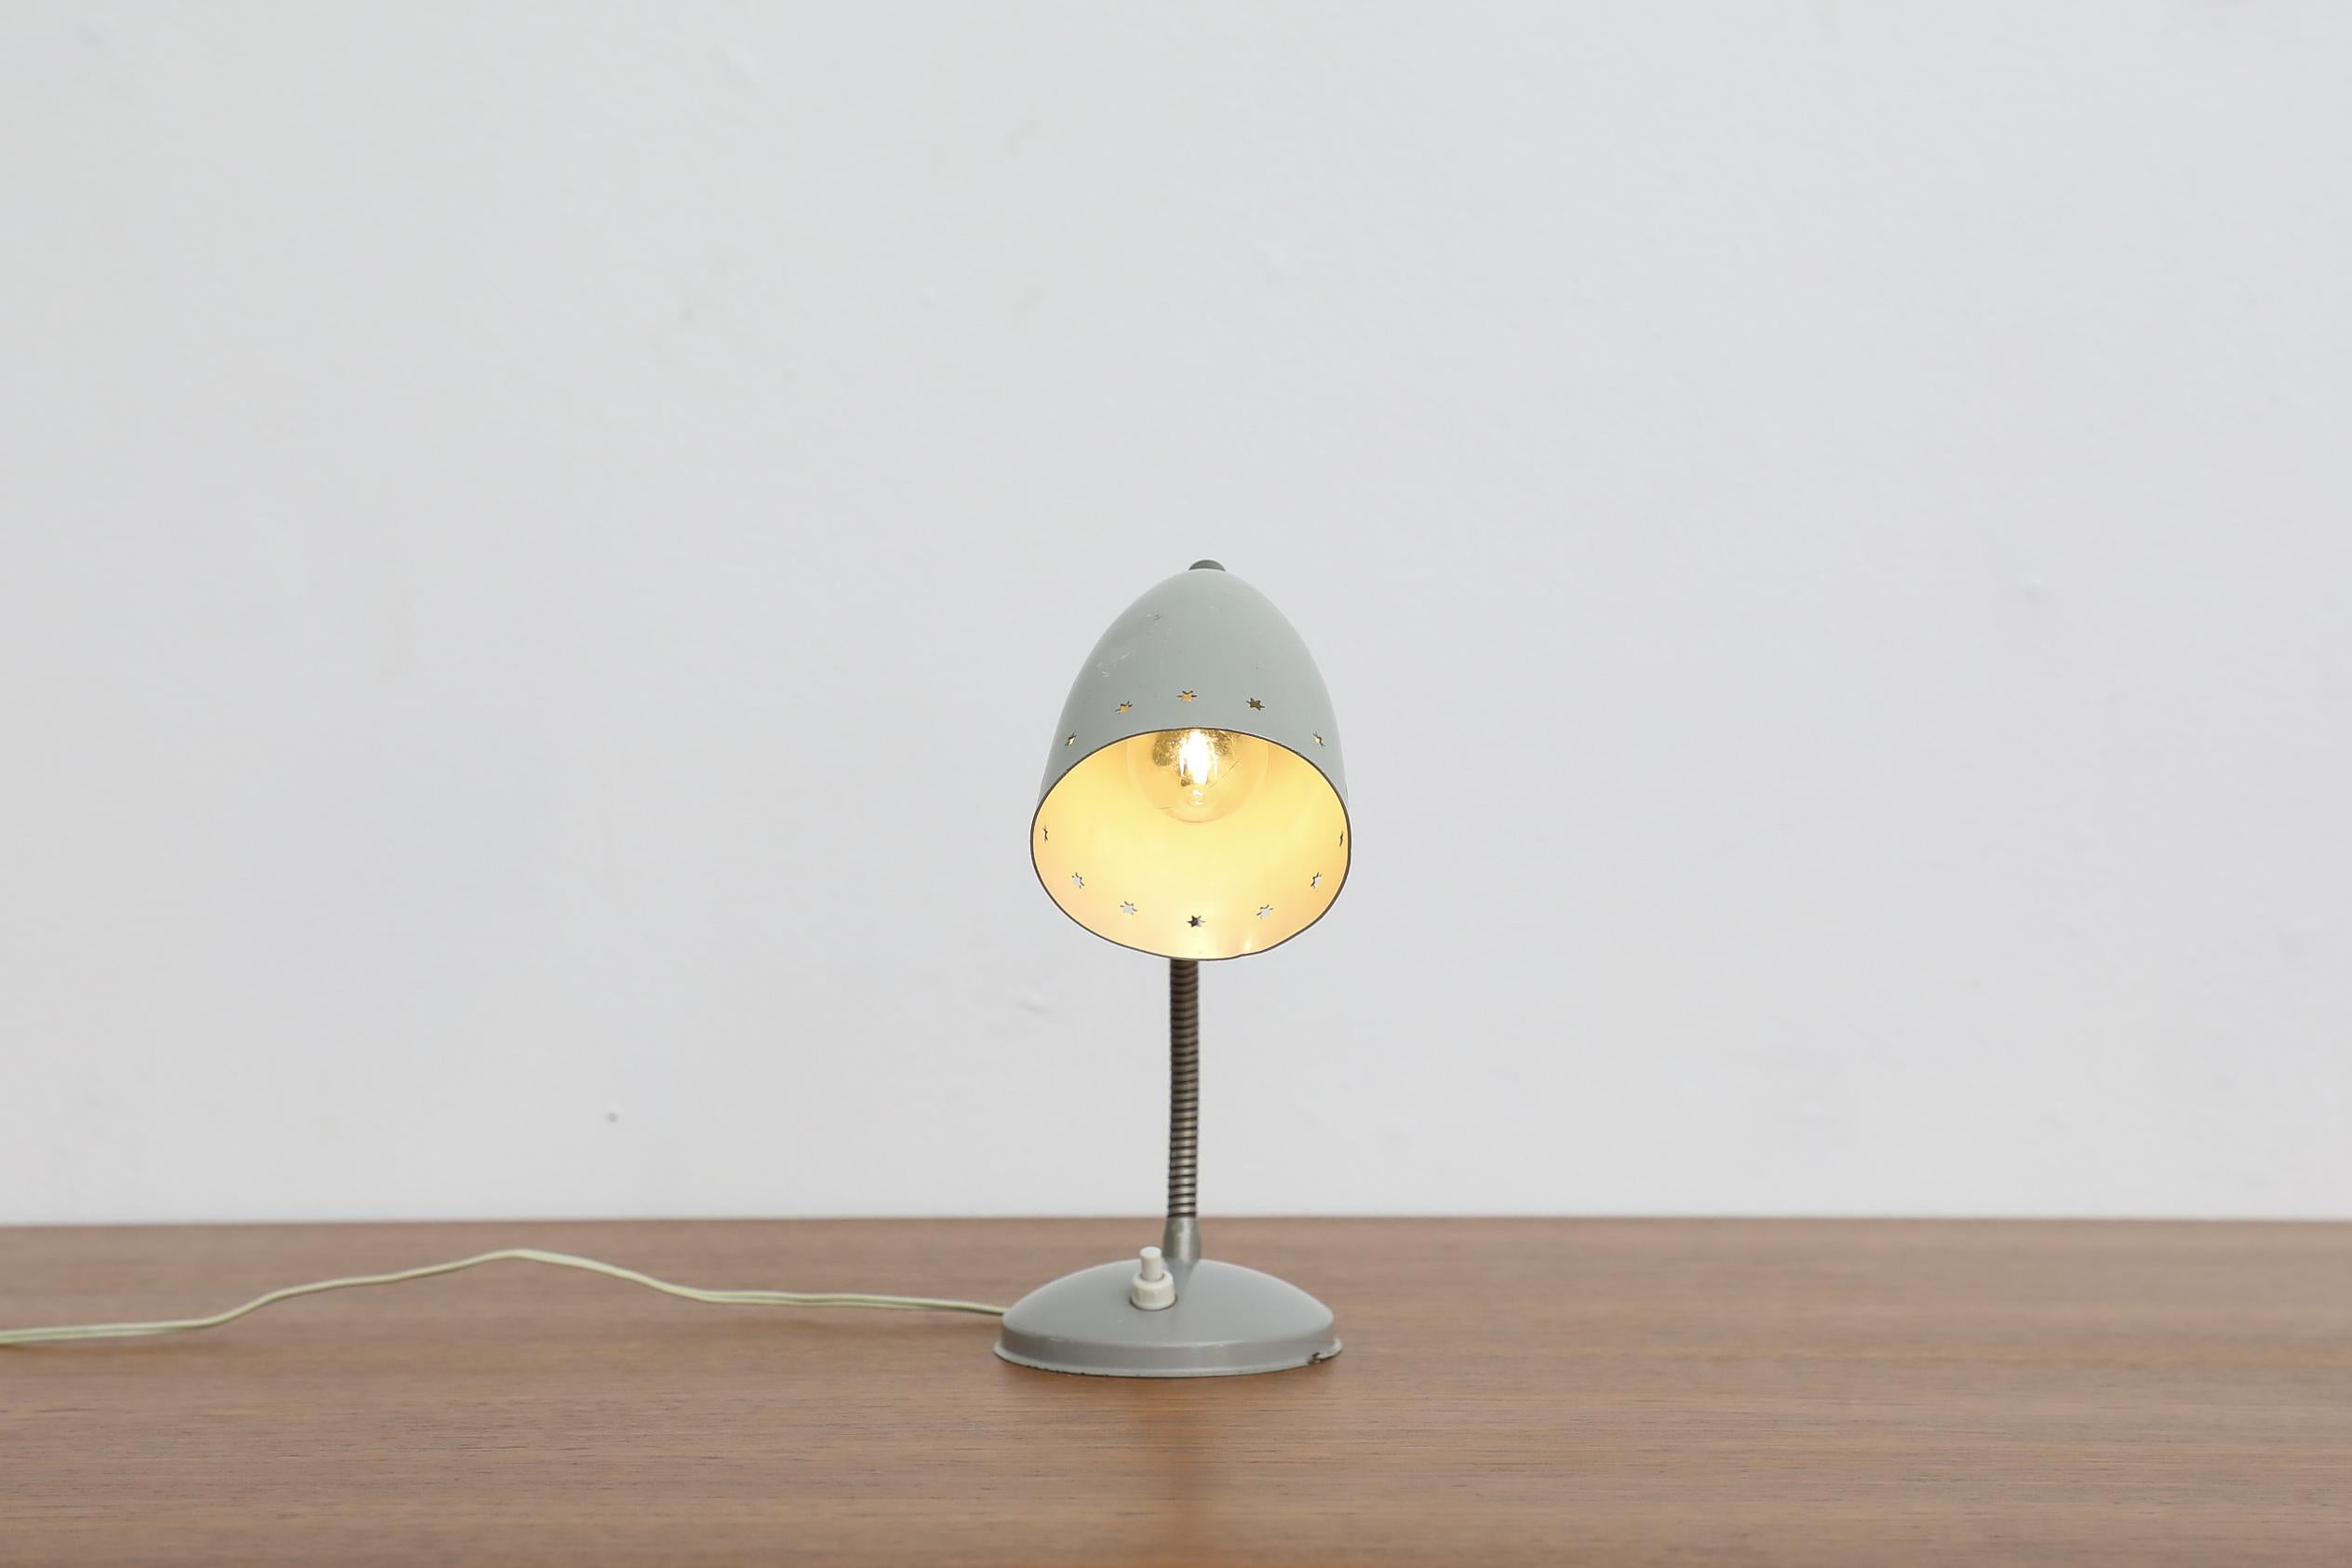 Mid-Century, very appealing little grey enameled reading lamp with tiny little cut-out stars around the shade by Hala Zeist, 1950-1960, Netherlands. In original condition with visible wear, including scratches and some possible denting. Wear is